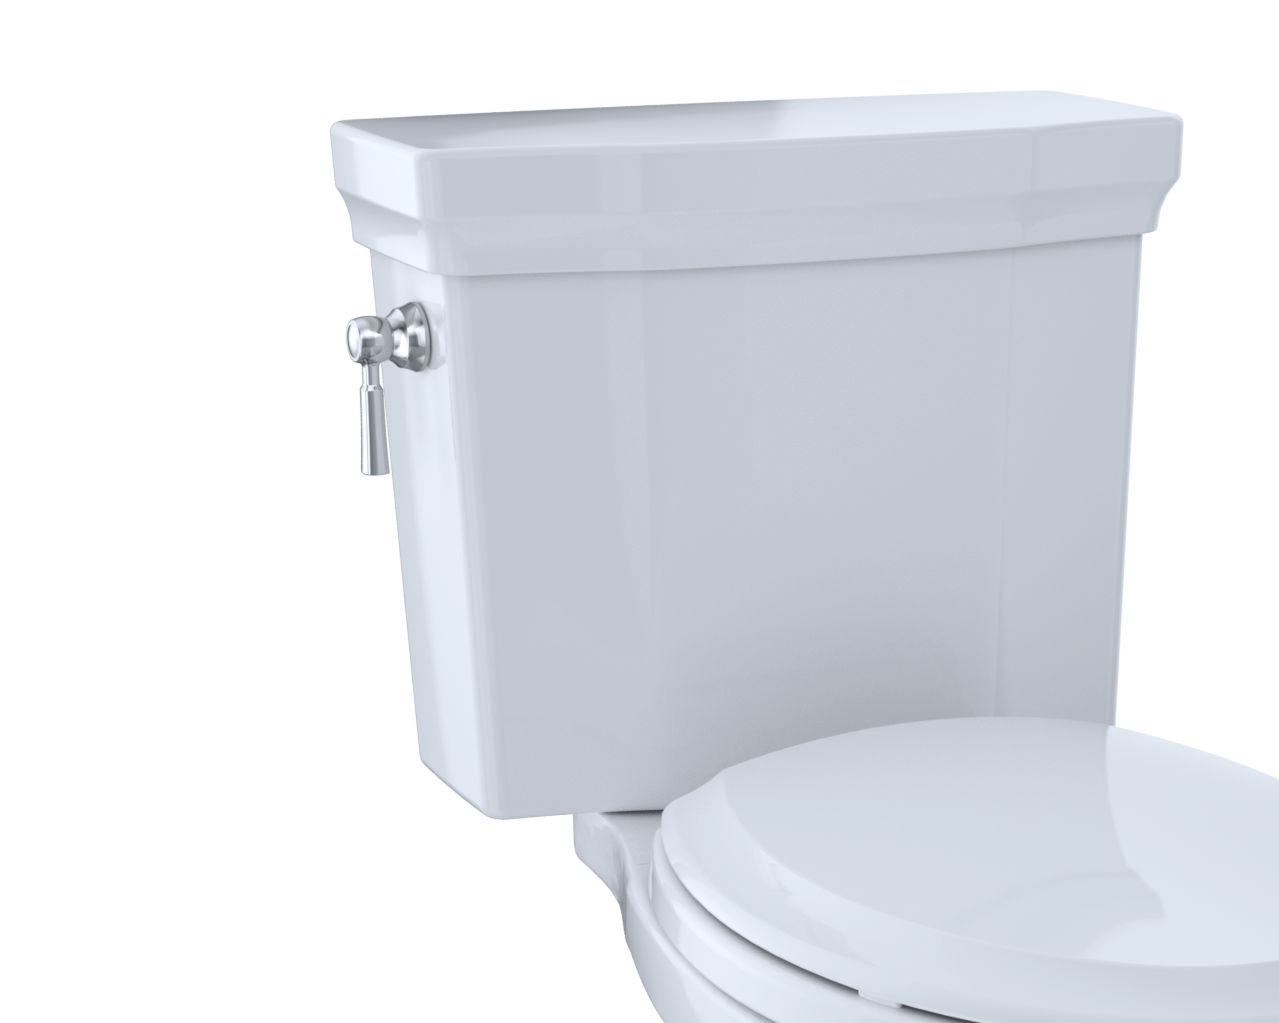 TOTO ST403ER#01 PROMENADE II 1.28 GPF TOILET TANK WITH RIGHT-HAND TRIP LEVER, COTTON WHITE